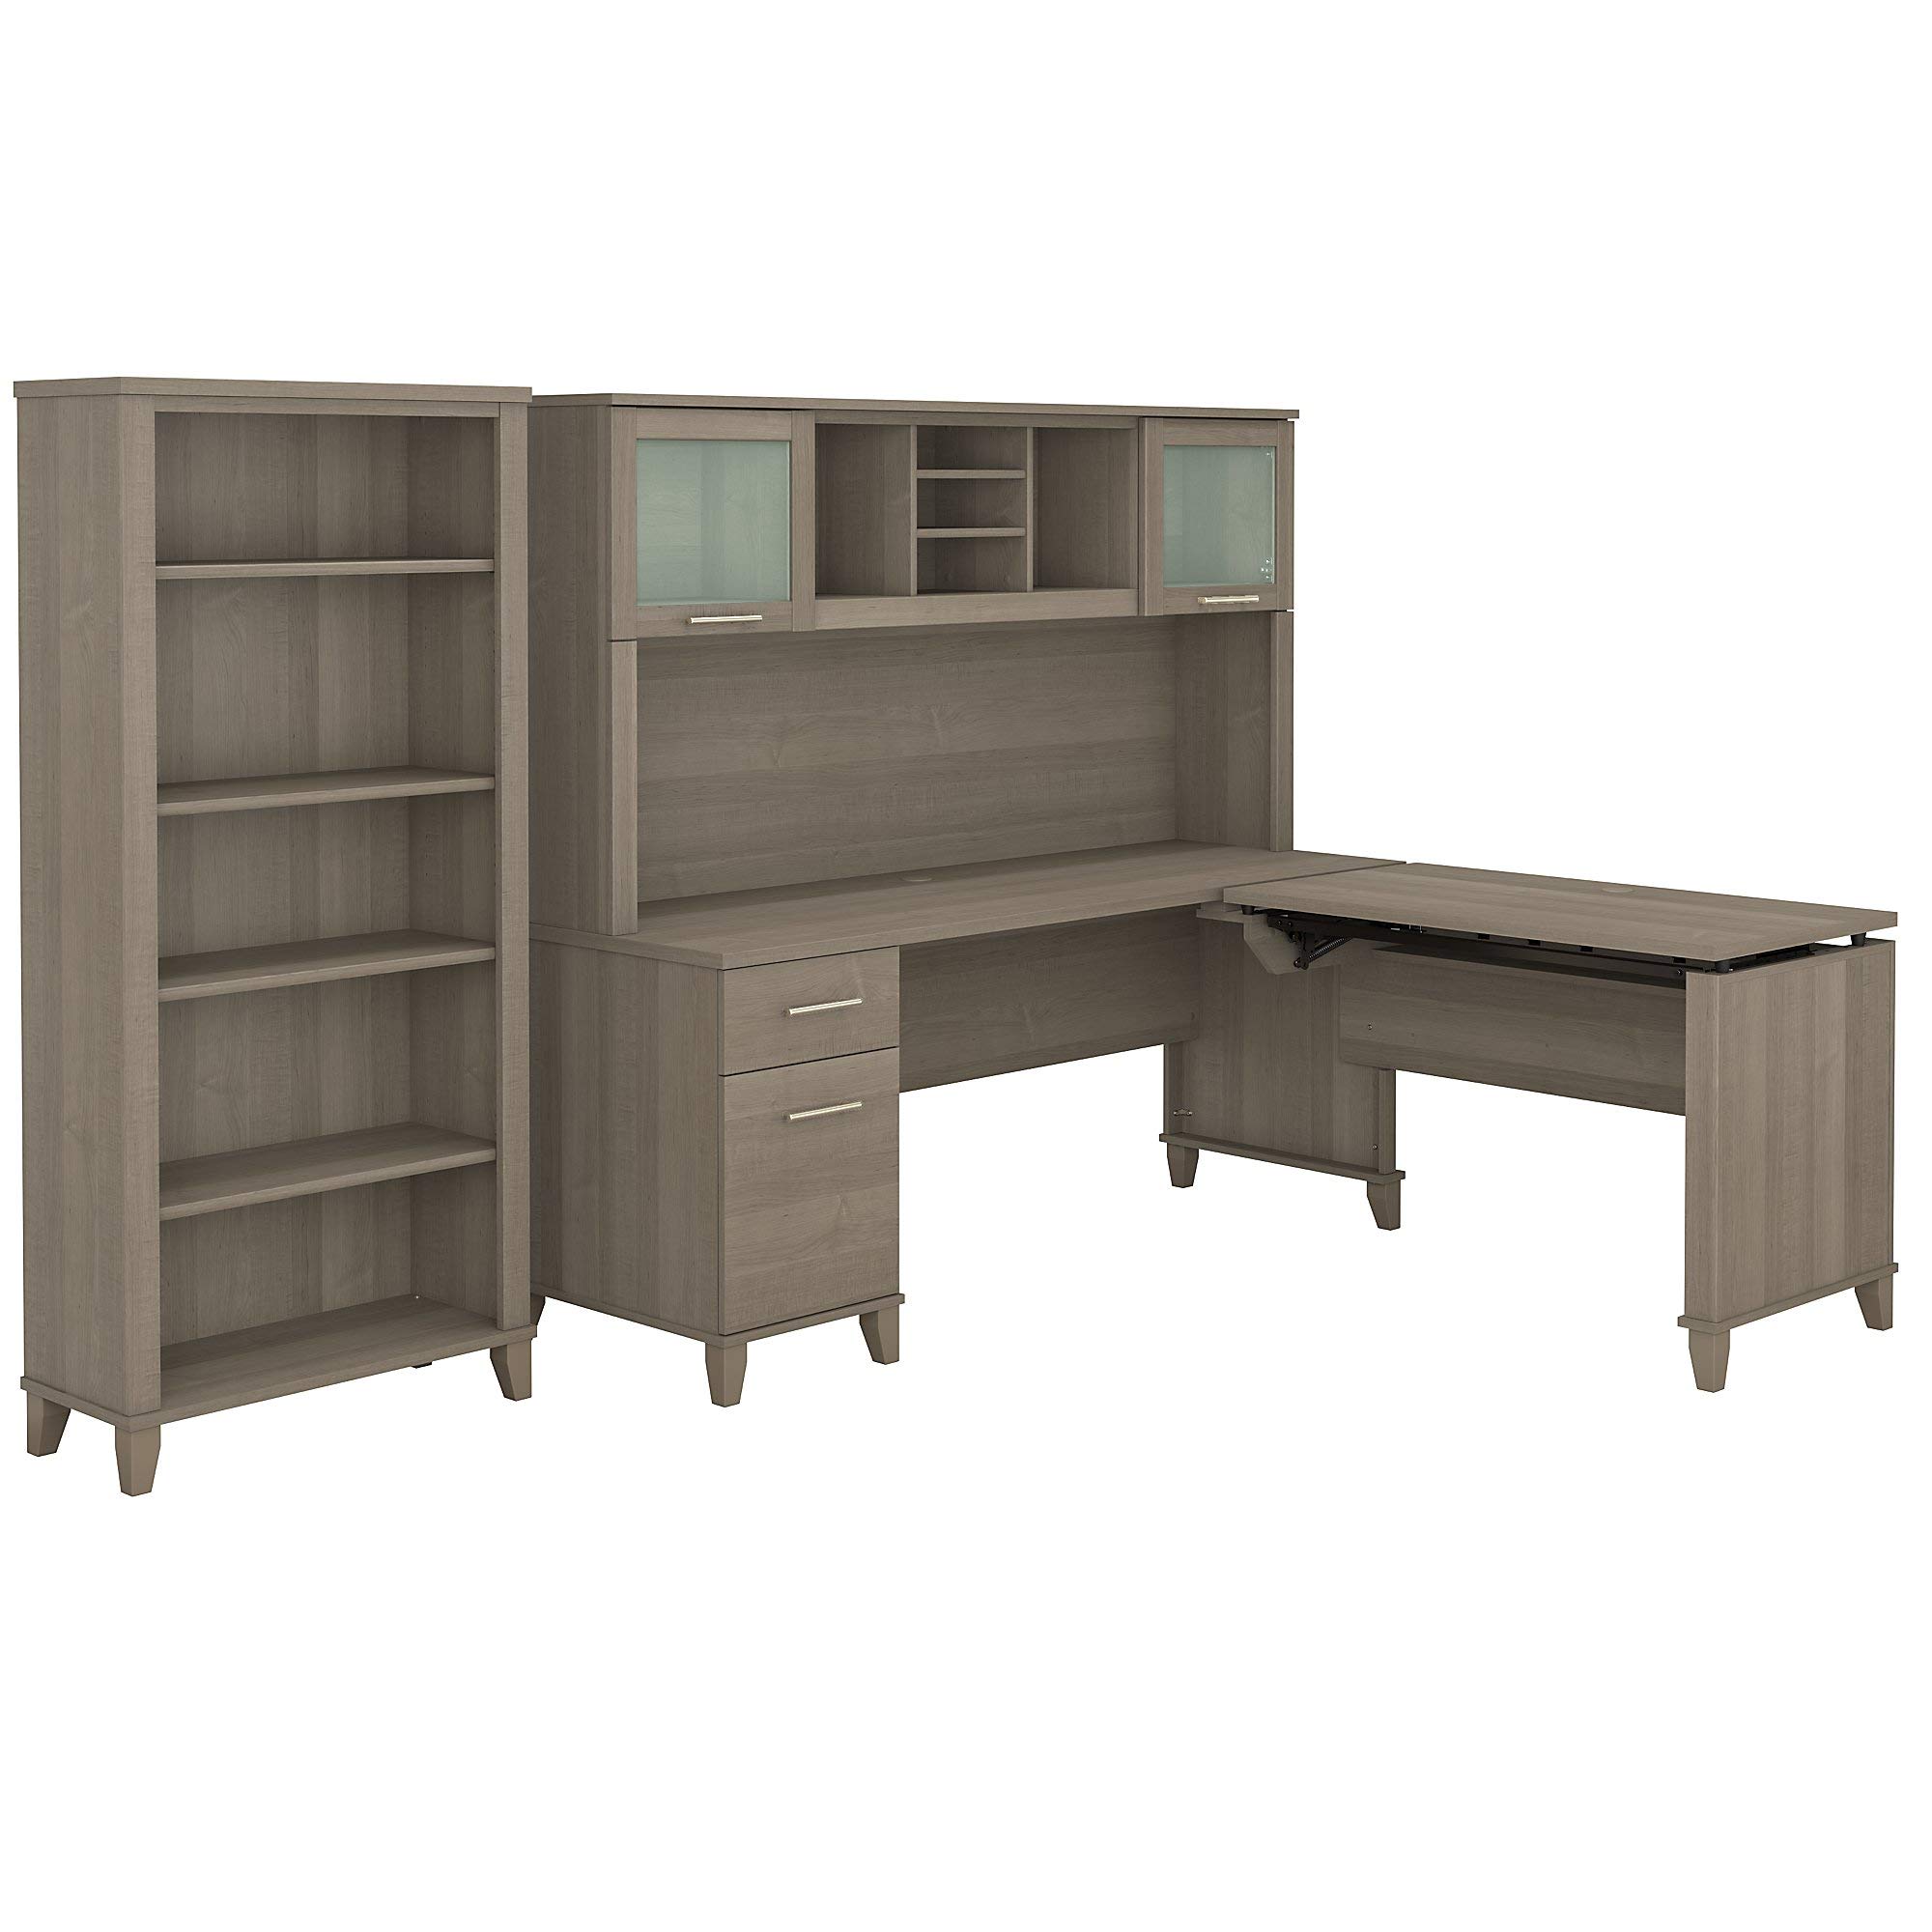 Bush Business Furniture Somerset 3 Position Sit to Stand L Shaped Desk with Hutch and Bookcase